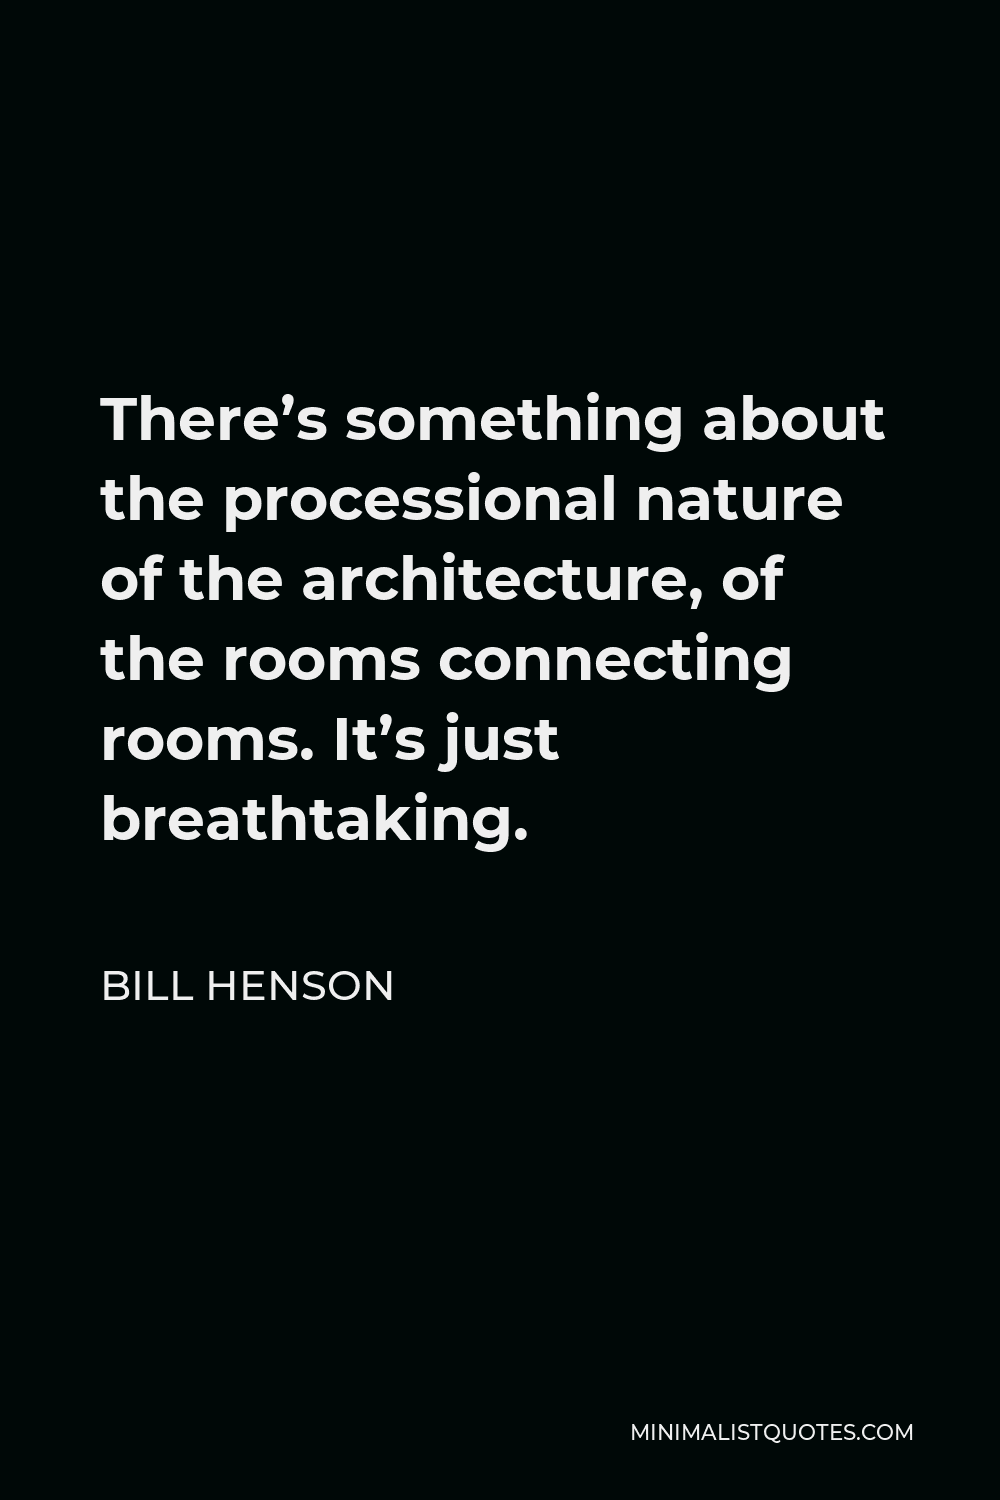 Bill Henson Quote - There’s something about the processional nature of the architecture, of the rooms connecting rooms. It’s just breathtaking.